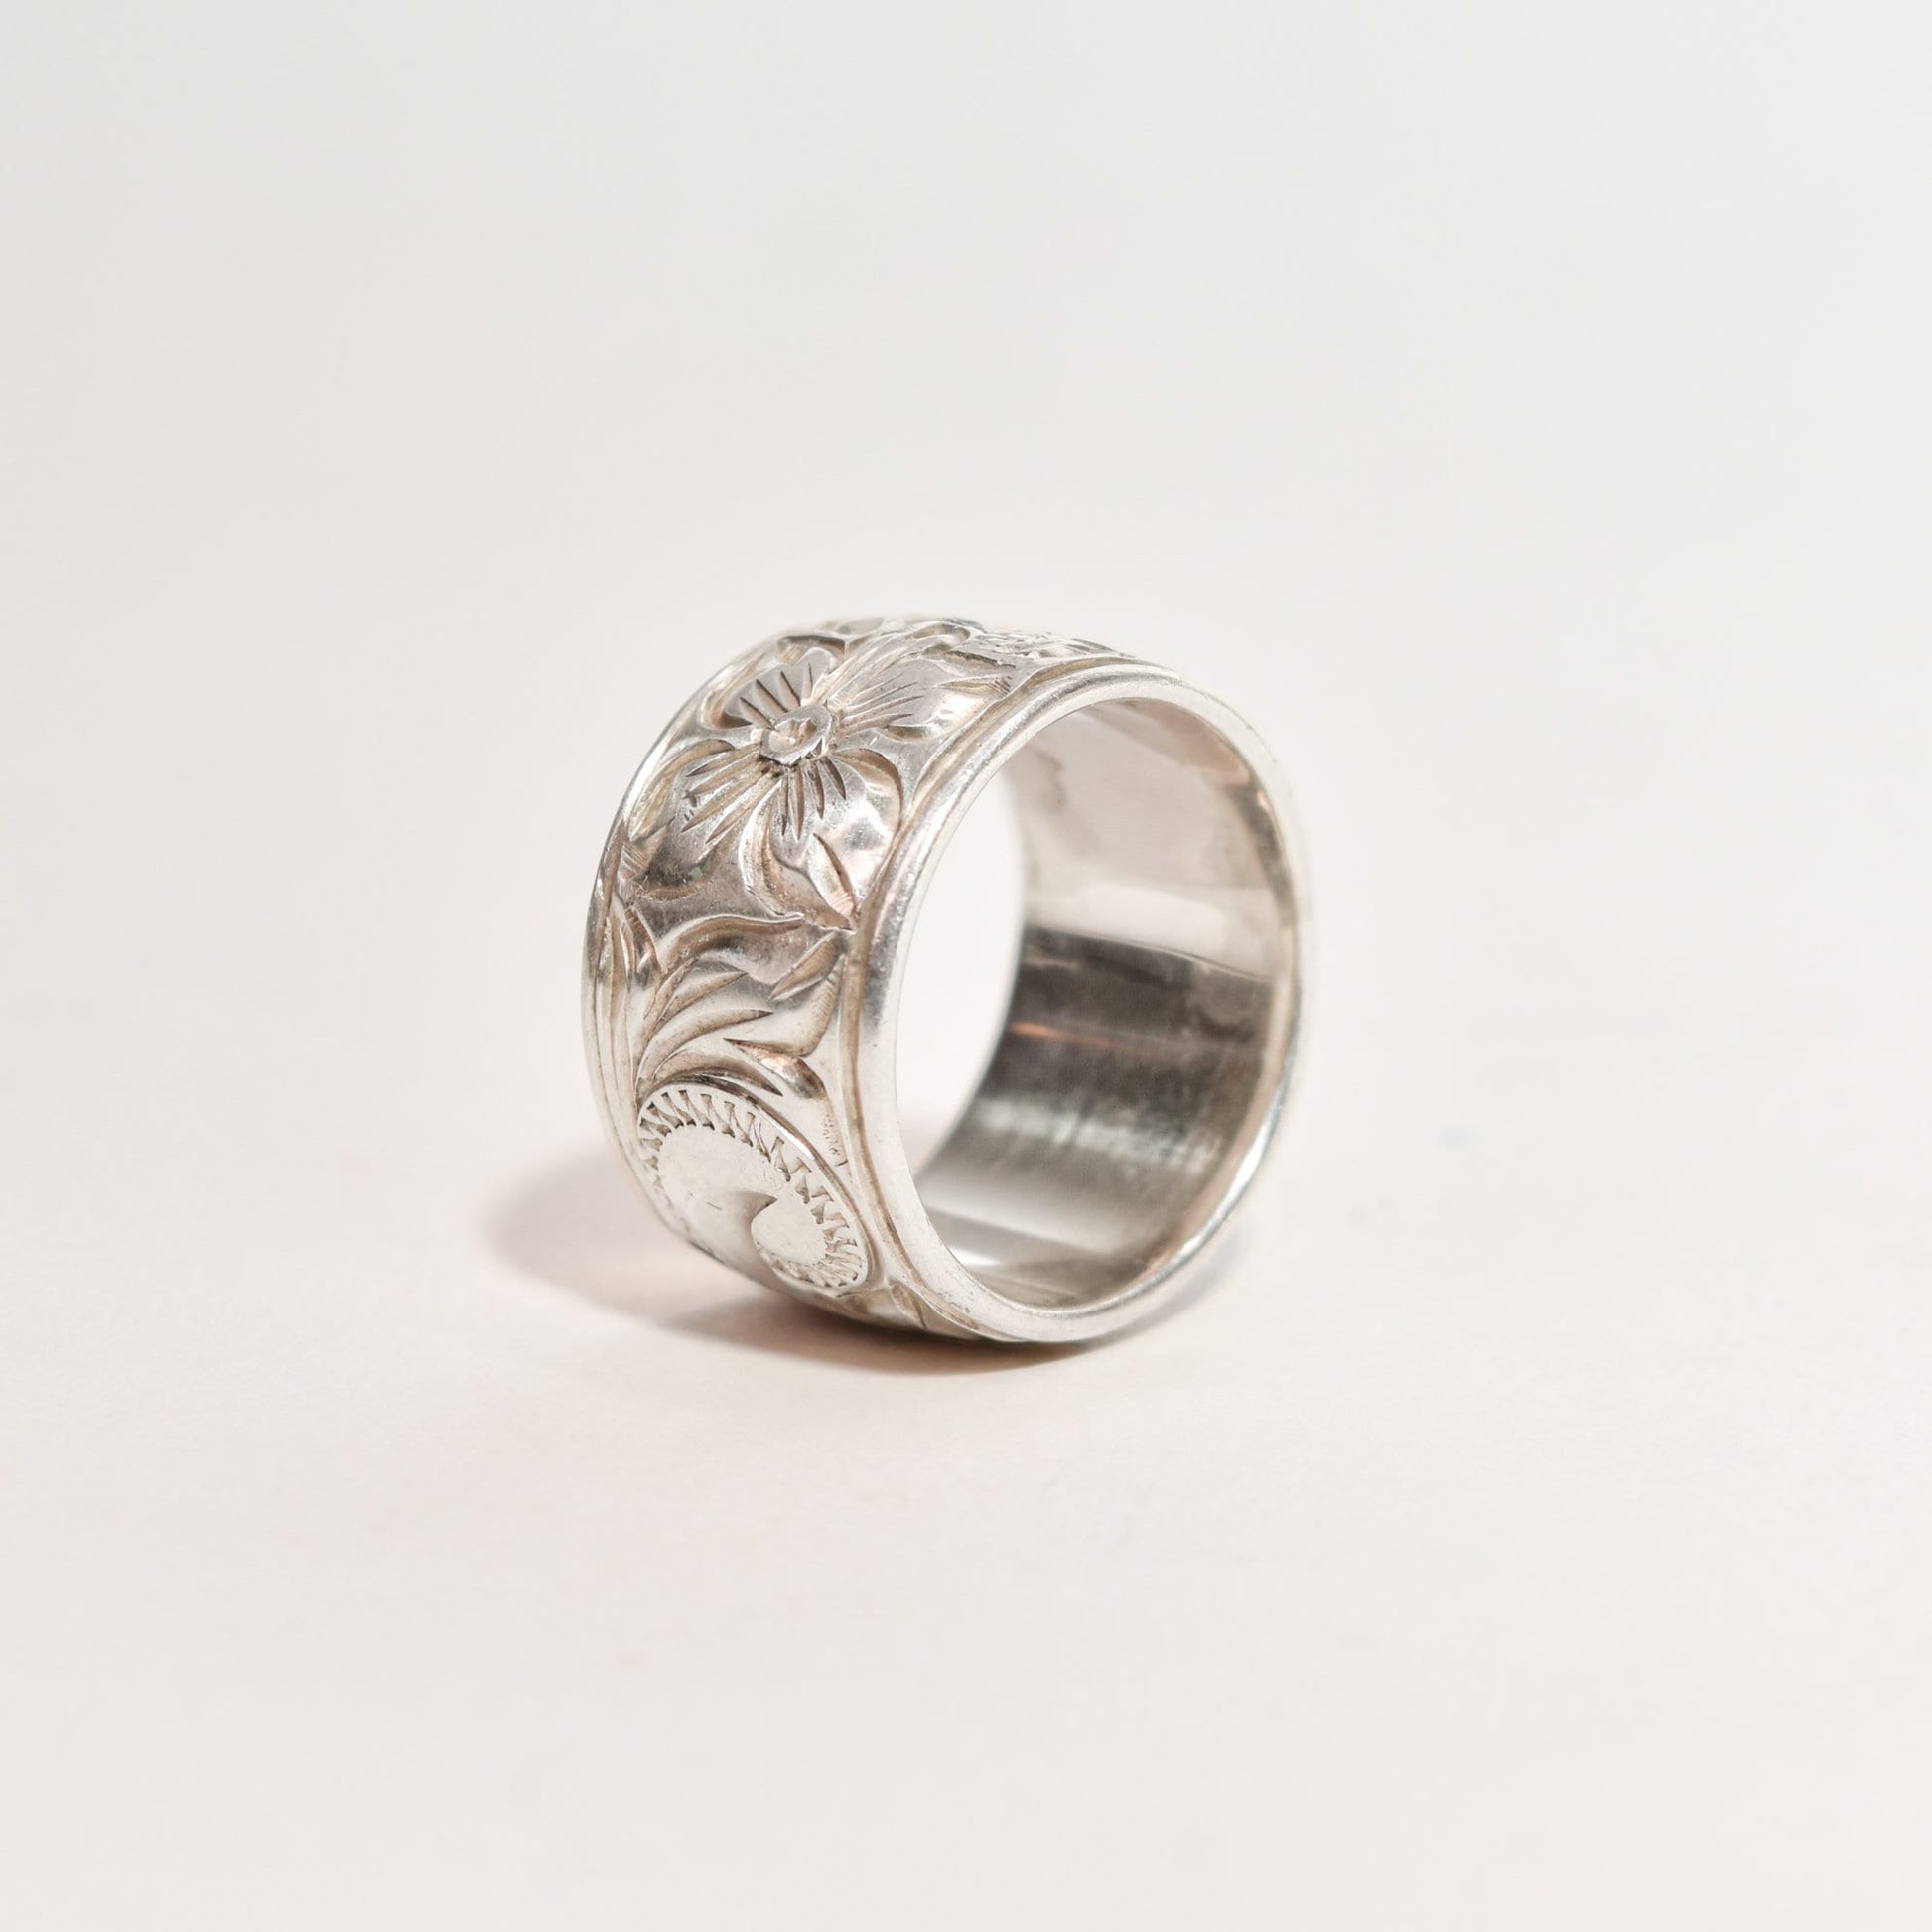 Alt text: Sterling silver band ring with floral engraving, 11.5mm wide, reflecting Art Nouveau style, size 6 US, on a neutral background.